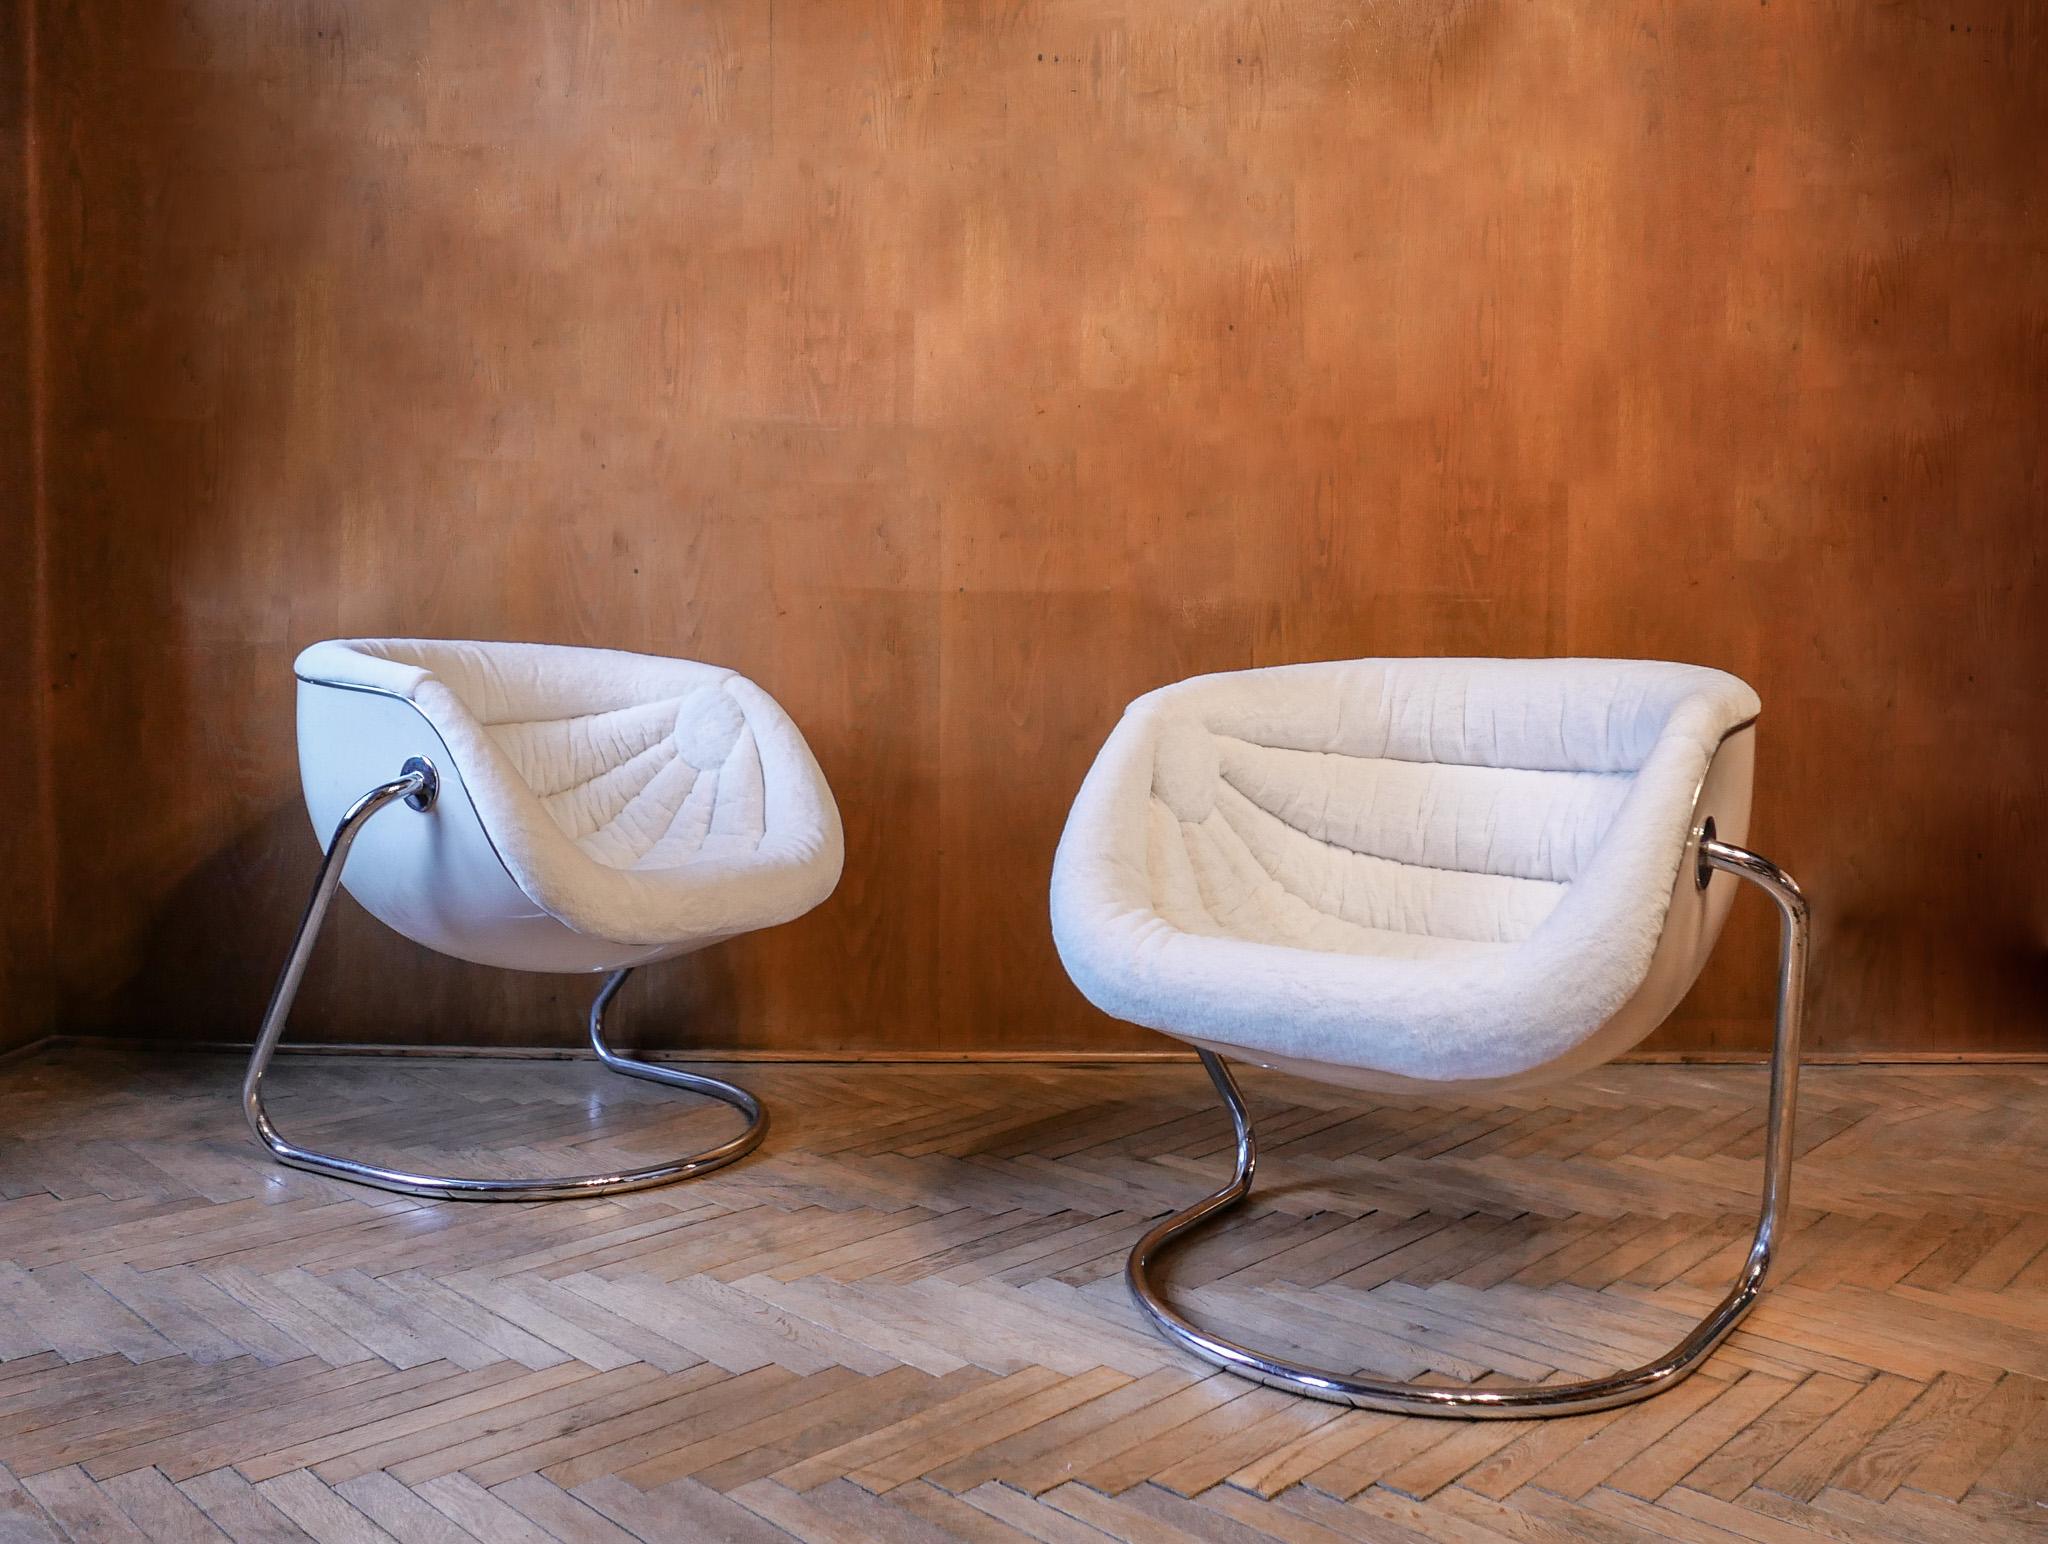 Mid-Century Modern space Age white fiberglass plush XL lounge chairs, Italy 1970s.

Stunning pair of 2 huge Space Age lounge chairs in snow white from Italy. The lounge chairs have a fiberglass seat shell framed by a narrow strip of chrome. The